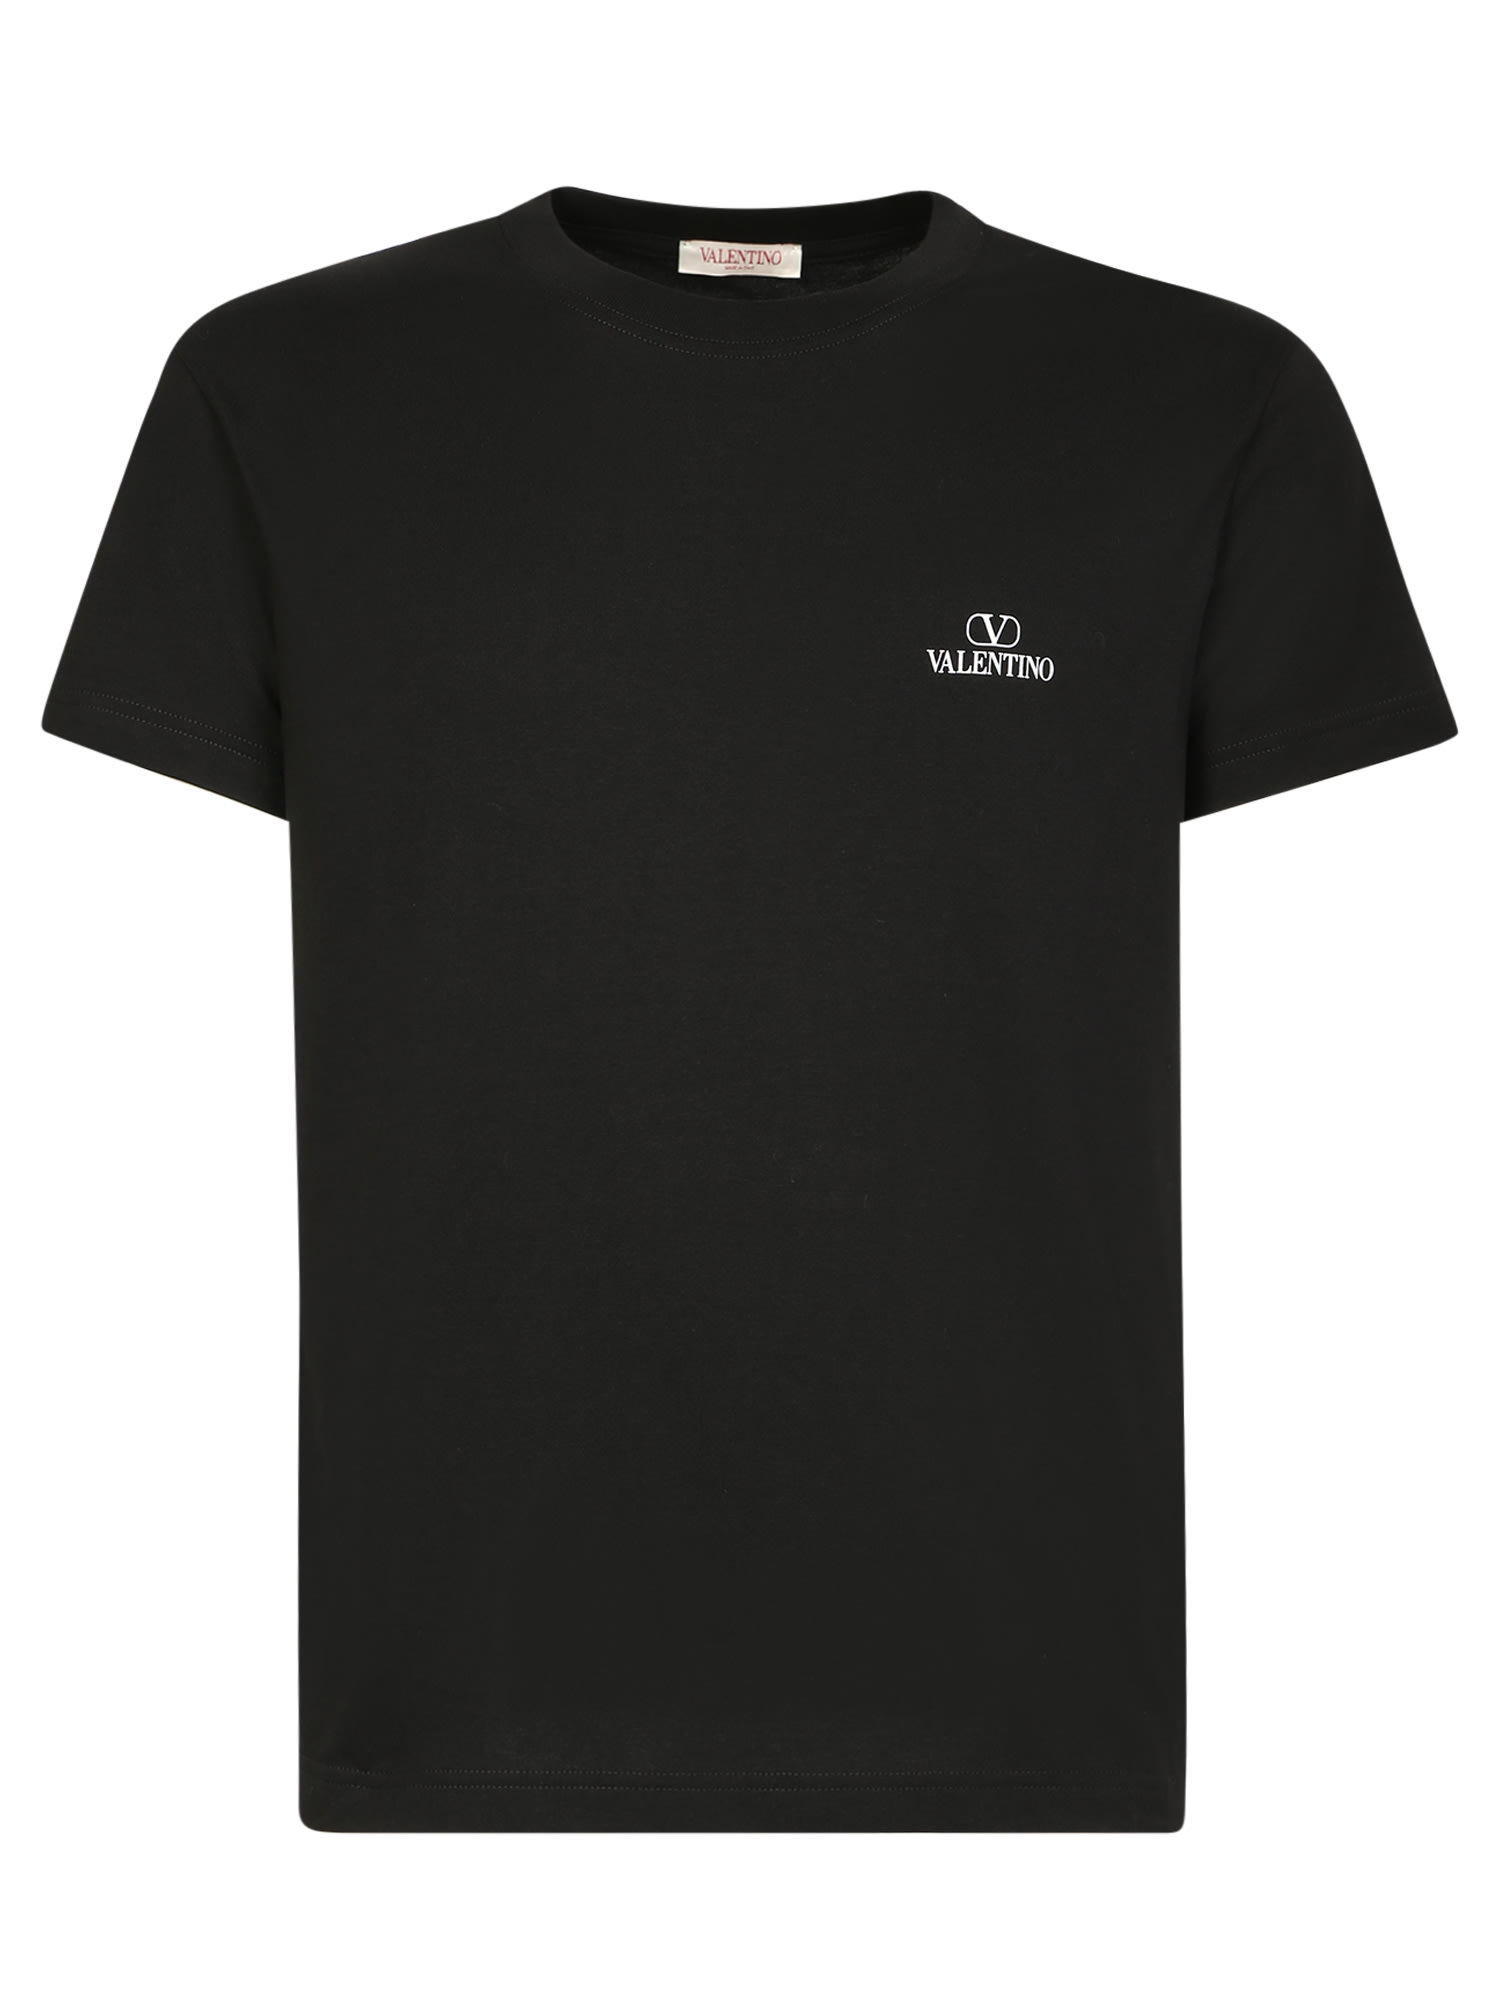 Valentino Simple T-shirt With Particular Vlogo On The Chest